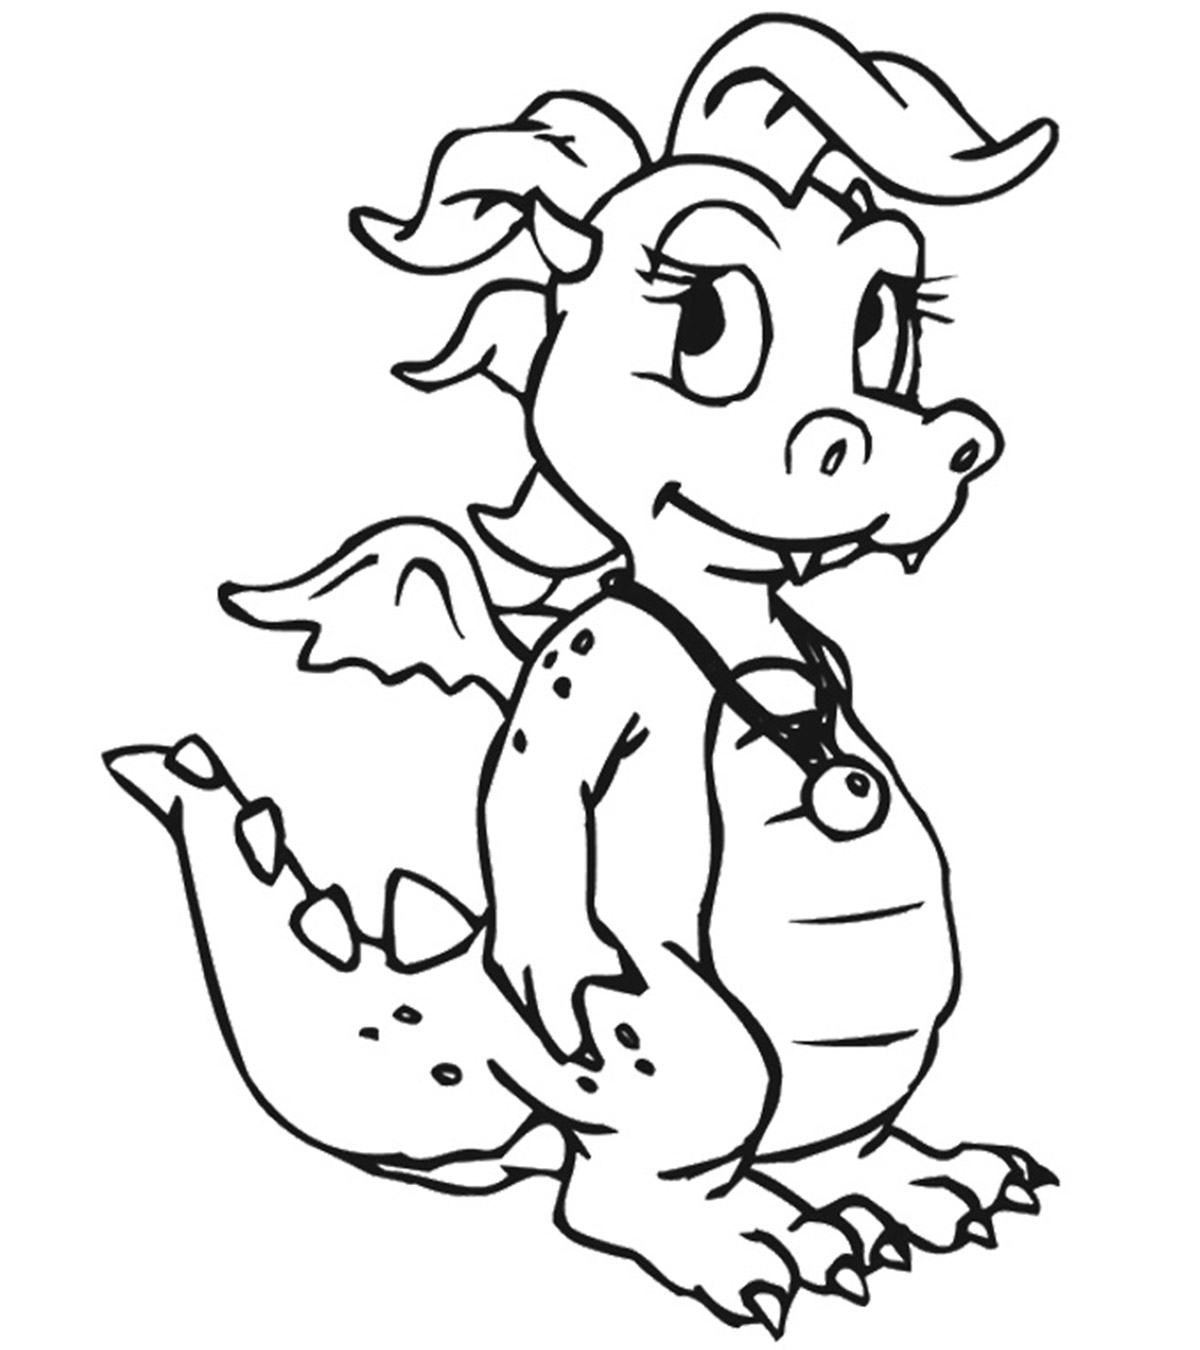 25 Best Dragon Coloring Pages Your Toddler Will Love To Color